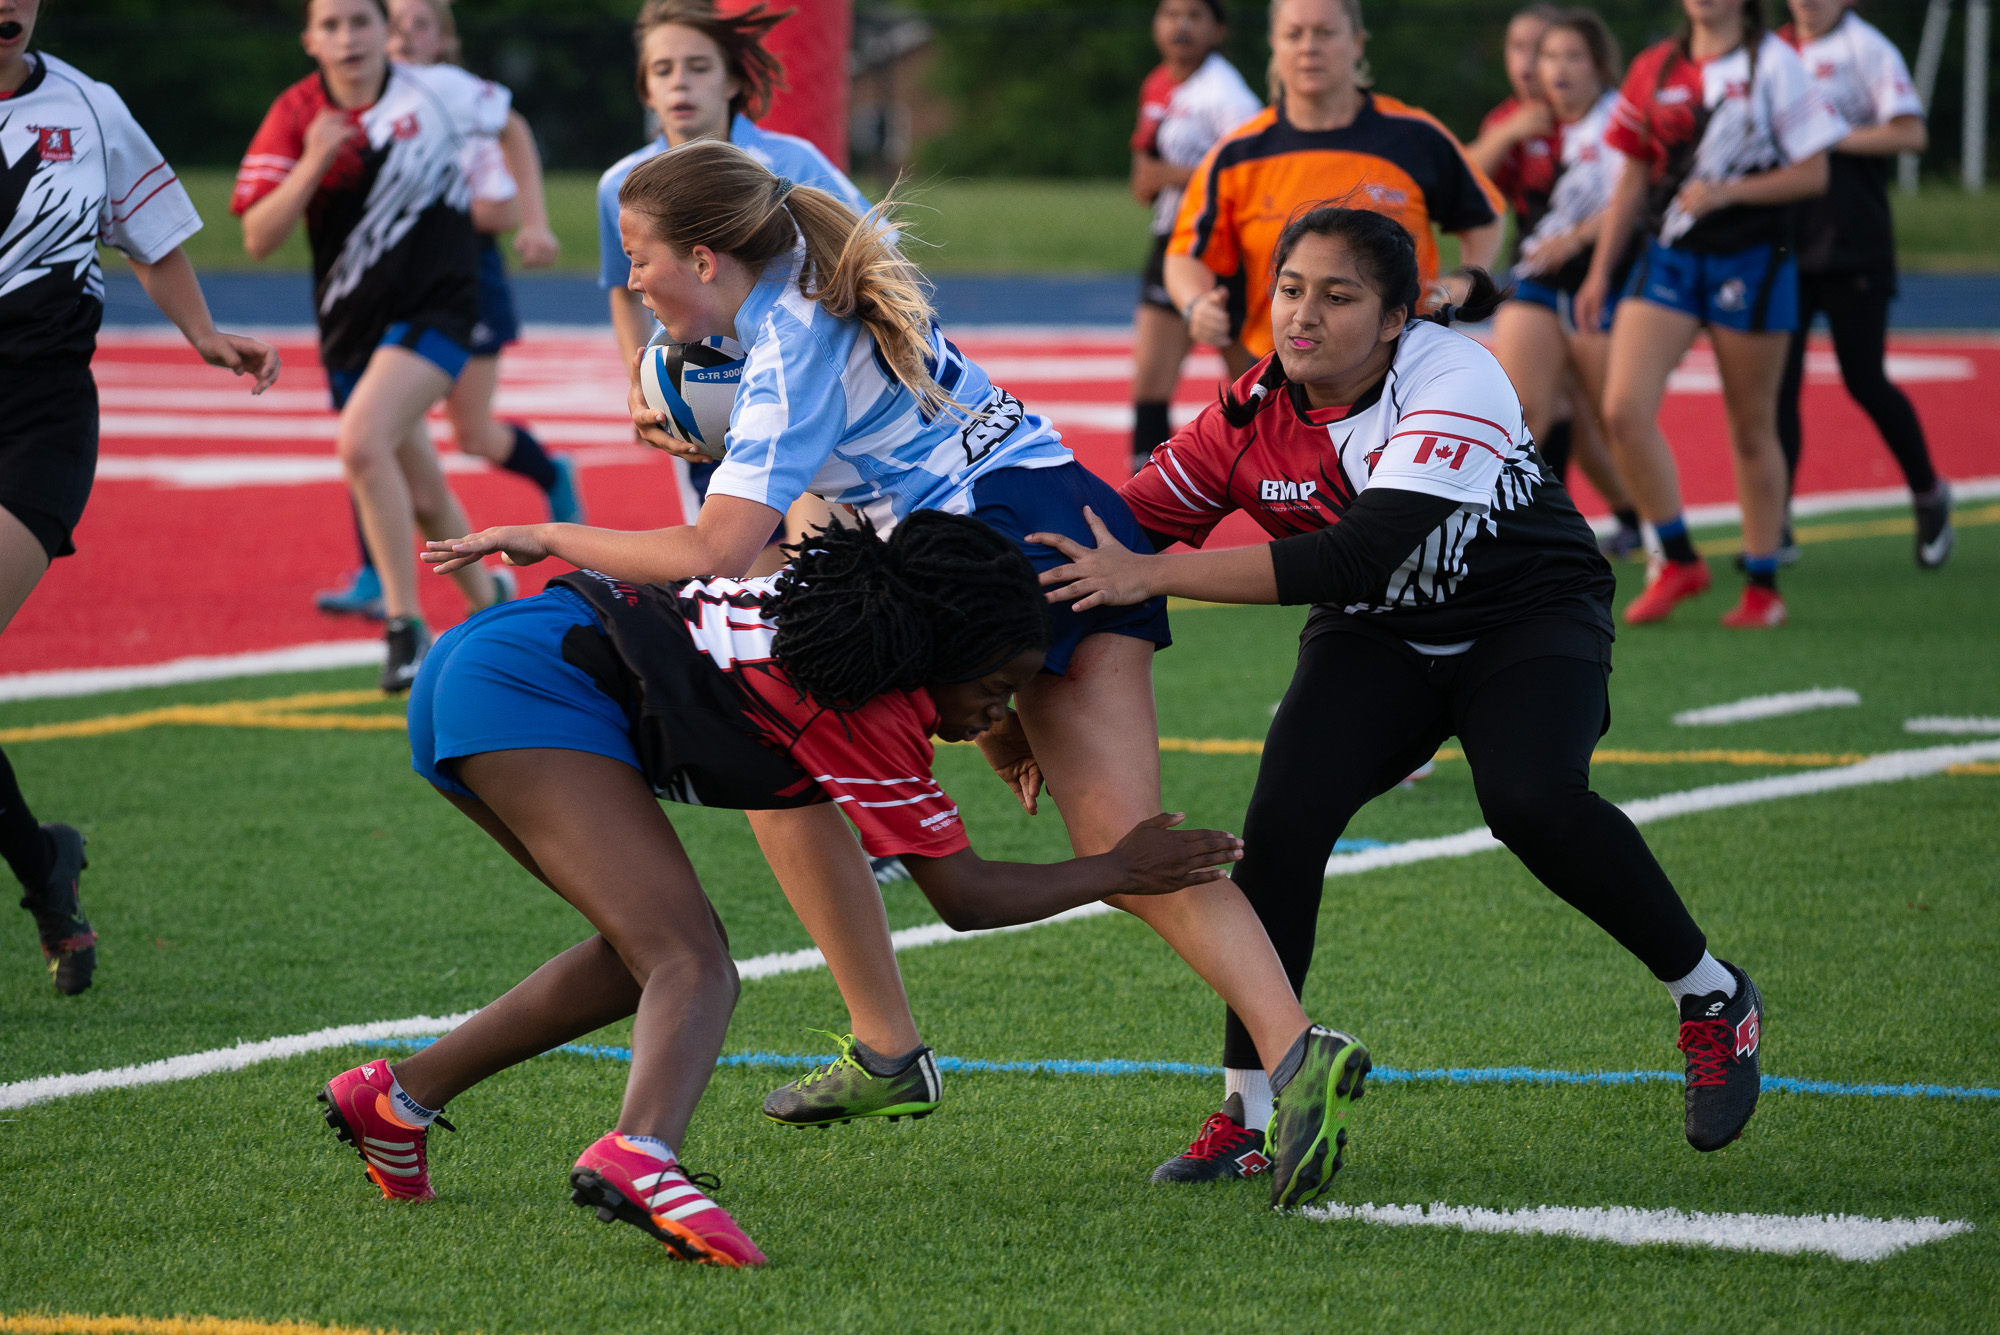 Girls rugby player running with ball